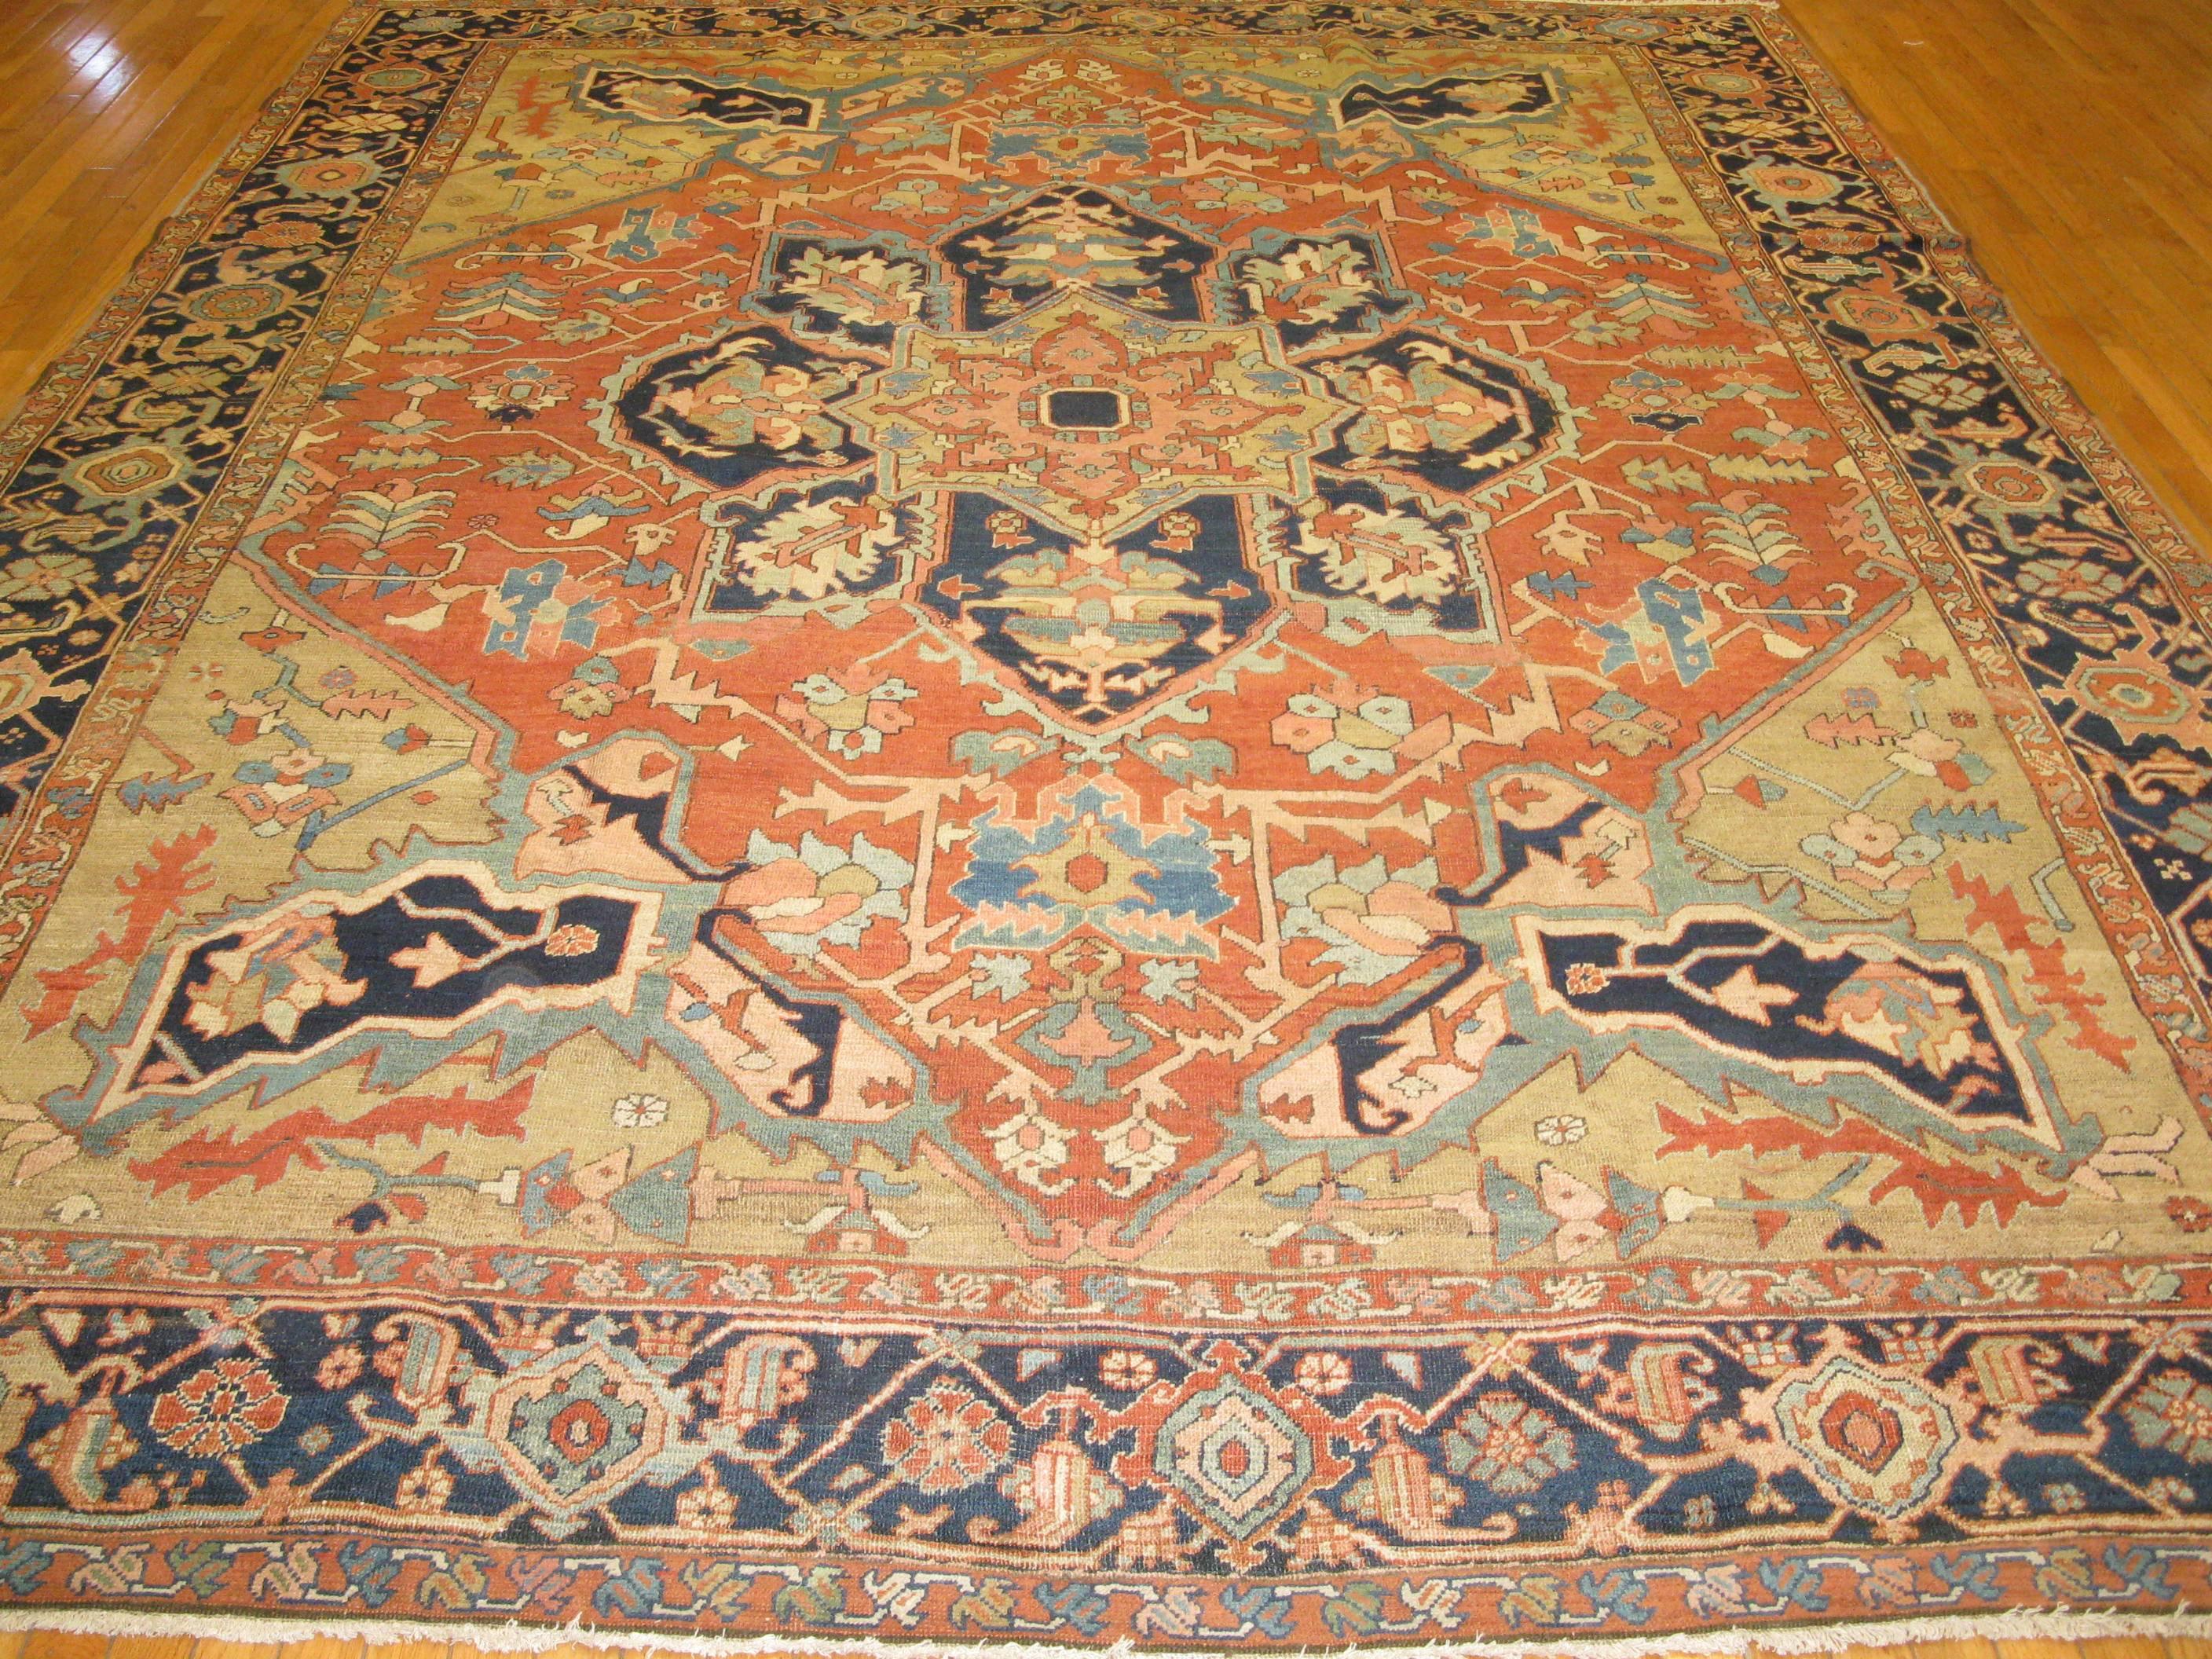 This is a beautiful and finely hand-knotted room size antique Persian Serapi rug. It has a traditional pattern with natural dye colors. It measures 8' 10 '' x 11' 4''.